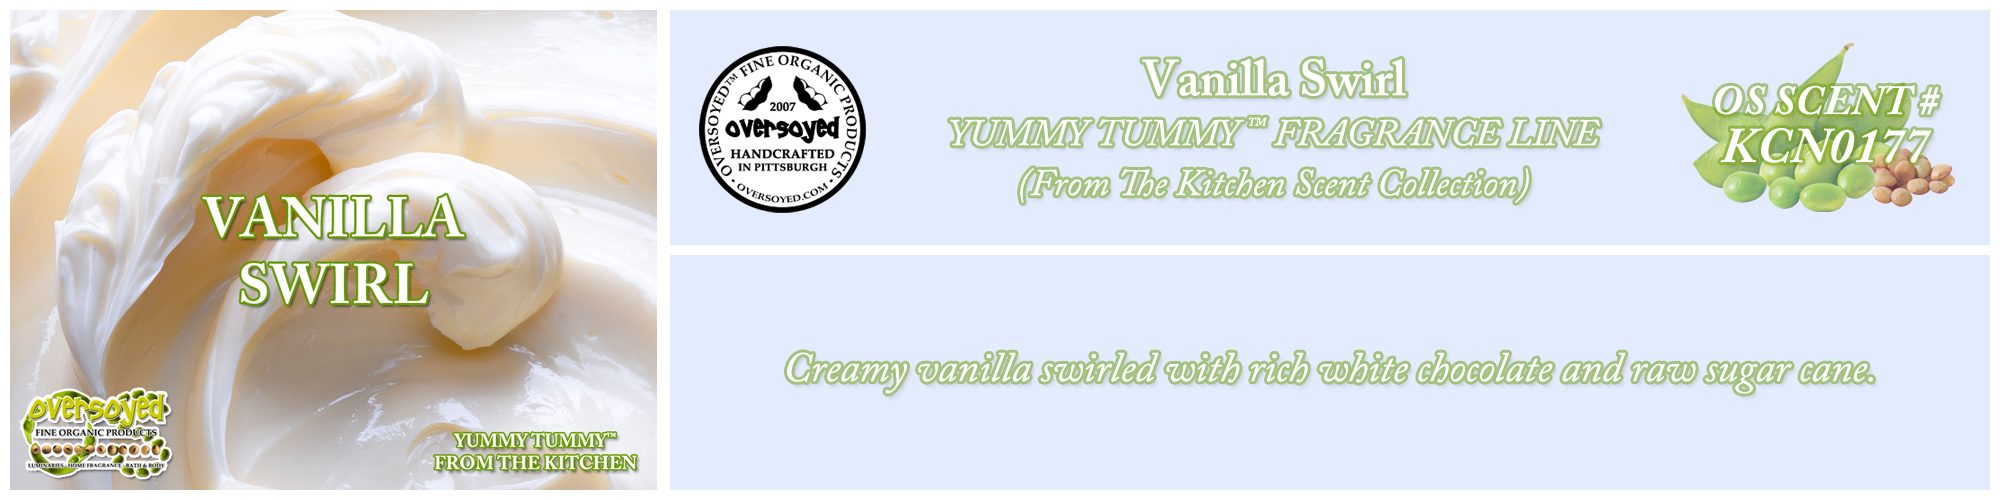 Vanilla Swirl Handcrafted Products Collection